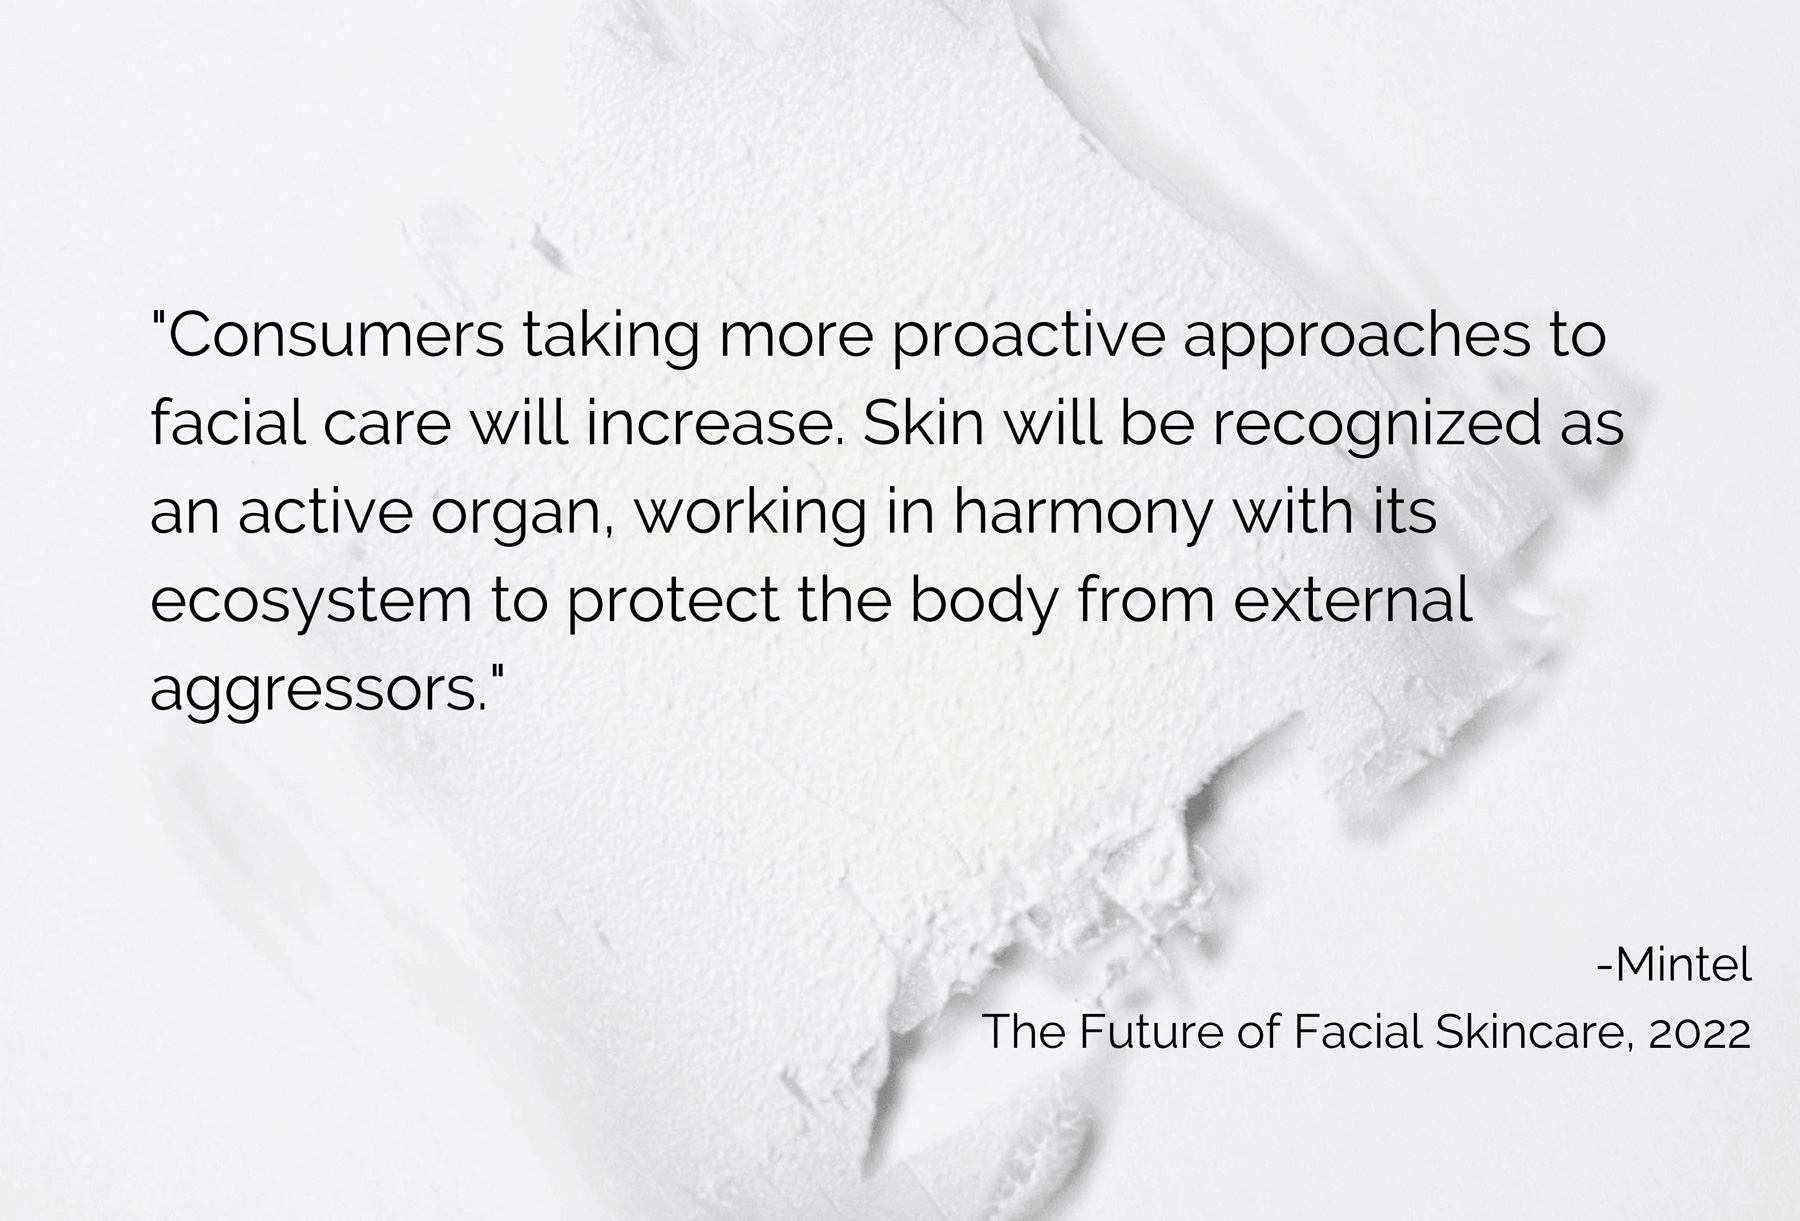 "Consumers taking more proactive approaches to facial care will increase. Skin will be recognized as an active organ, working in harmony with its ecosystem to protect the body from external aggressors." Mintel 2022